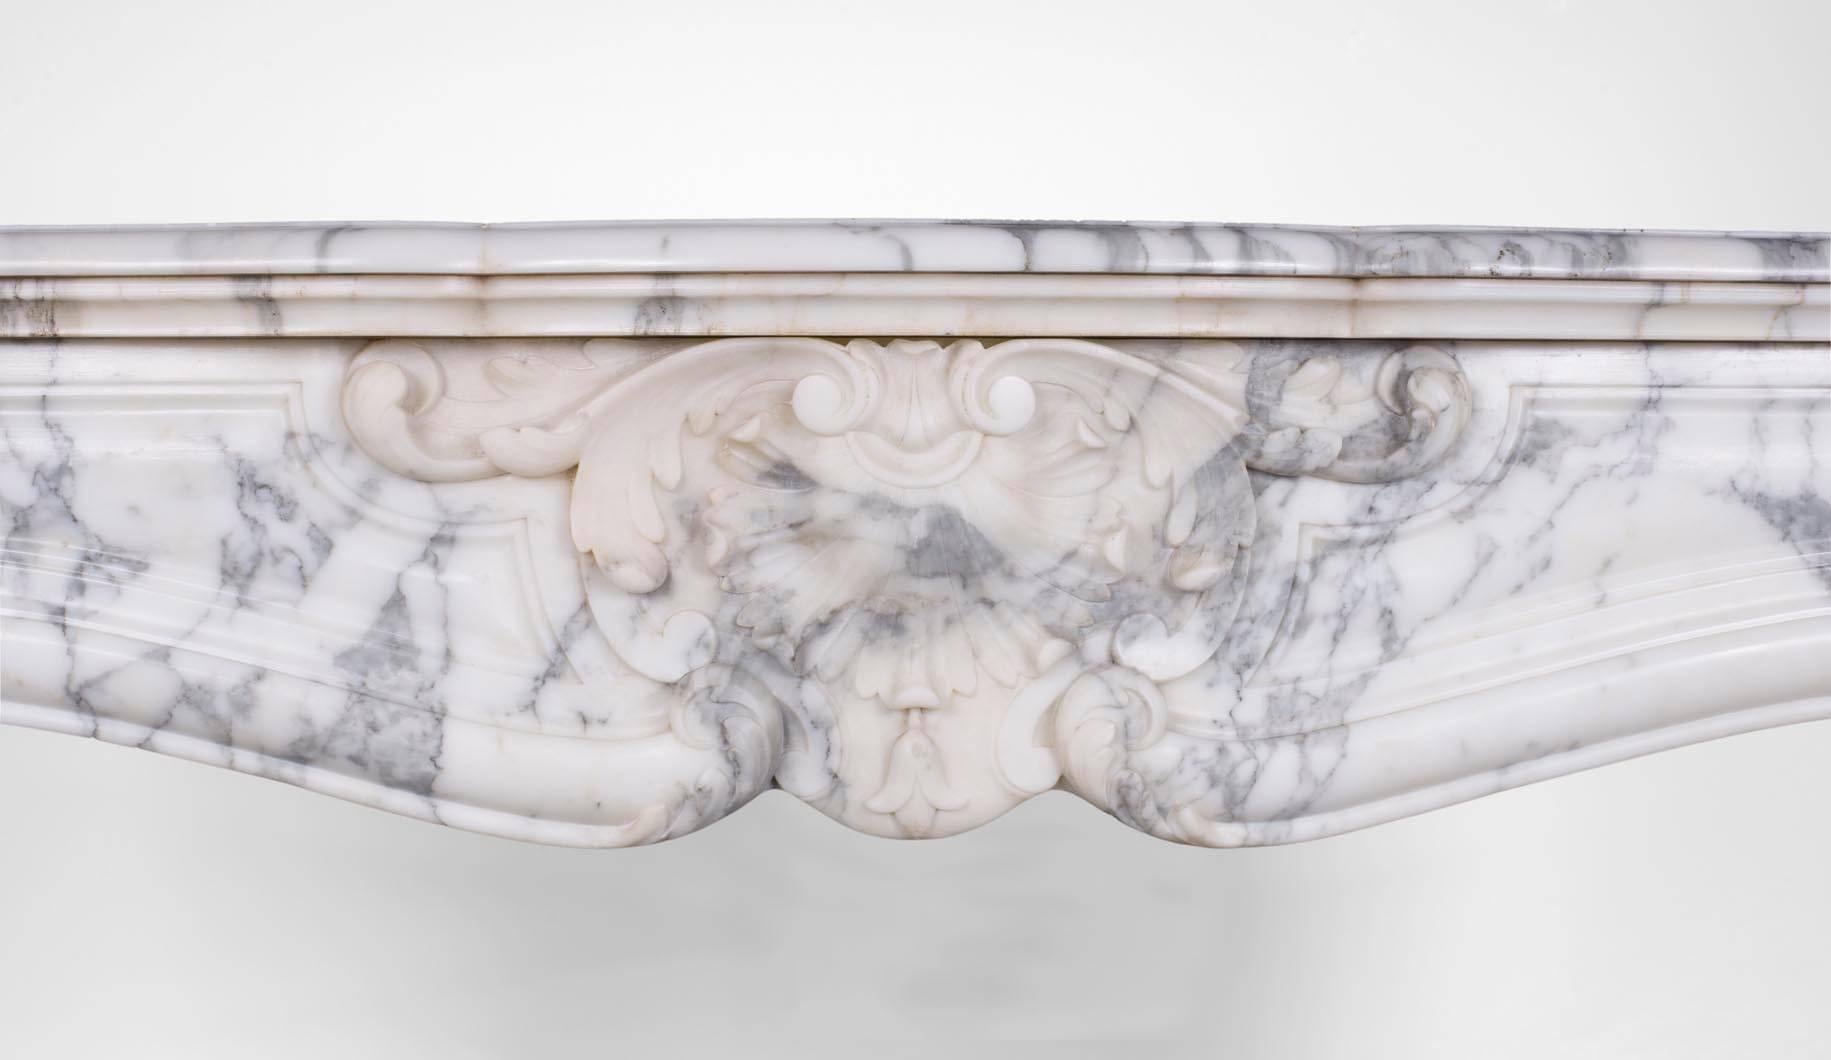 This Louis XV style fireplace was made in the 19th century. It is a model with three shells carved in an Arabescato marble (coming from the Carrara area, Italy).

This fireplace is sold without any fireplace insert nor marble floor but could be